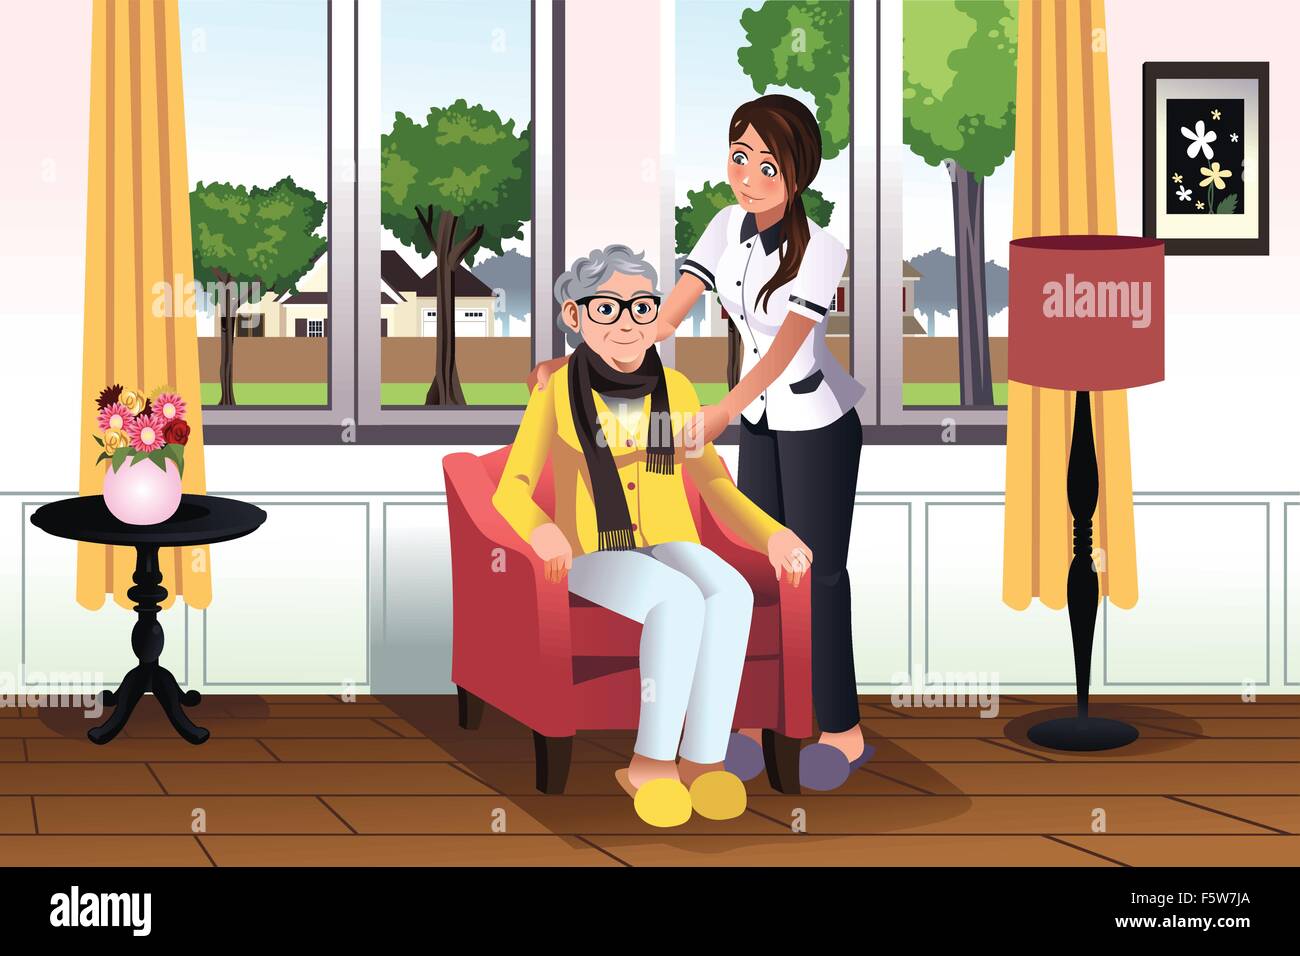 A vector illustration of young woman taking care of a senior lady Stock Vector